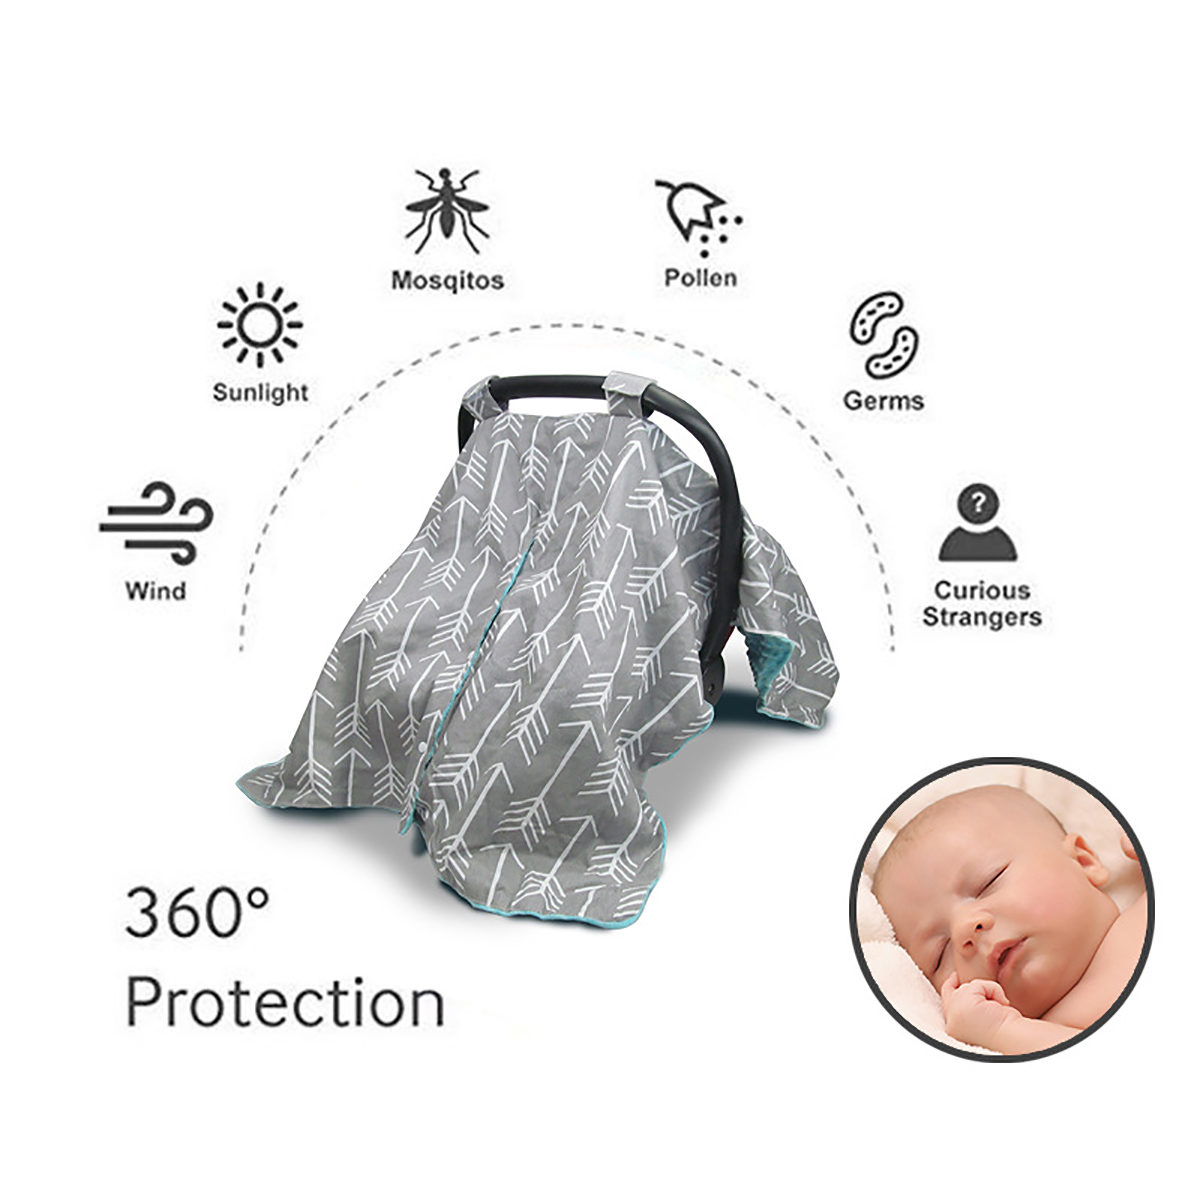 4-IN-1-Thickened-Multi-Use-Stroller-Cart-Seat-Cover-Breastfeeding-Nursing-Scarf-Snug-Warm-Breathable-1810349-3